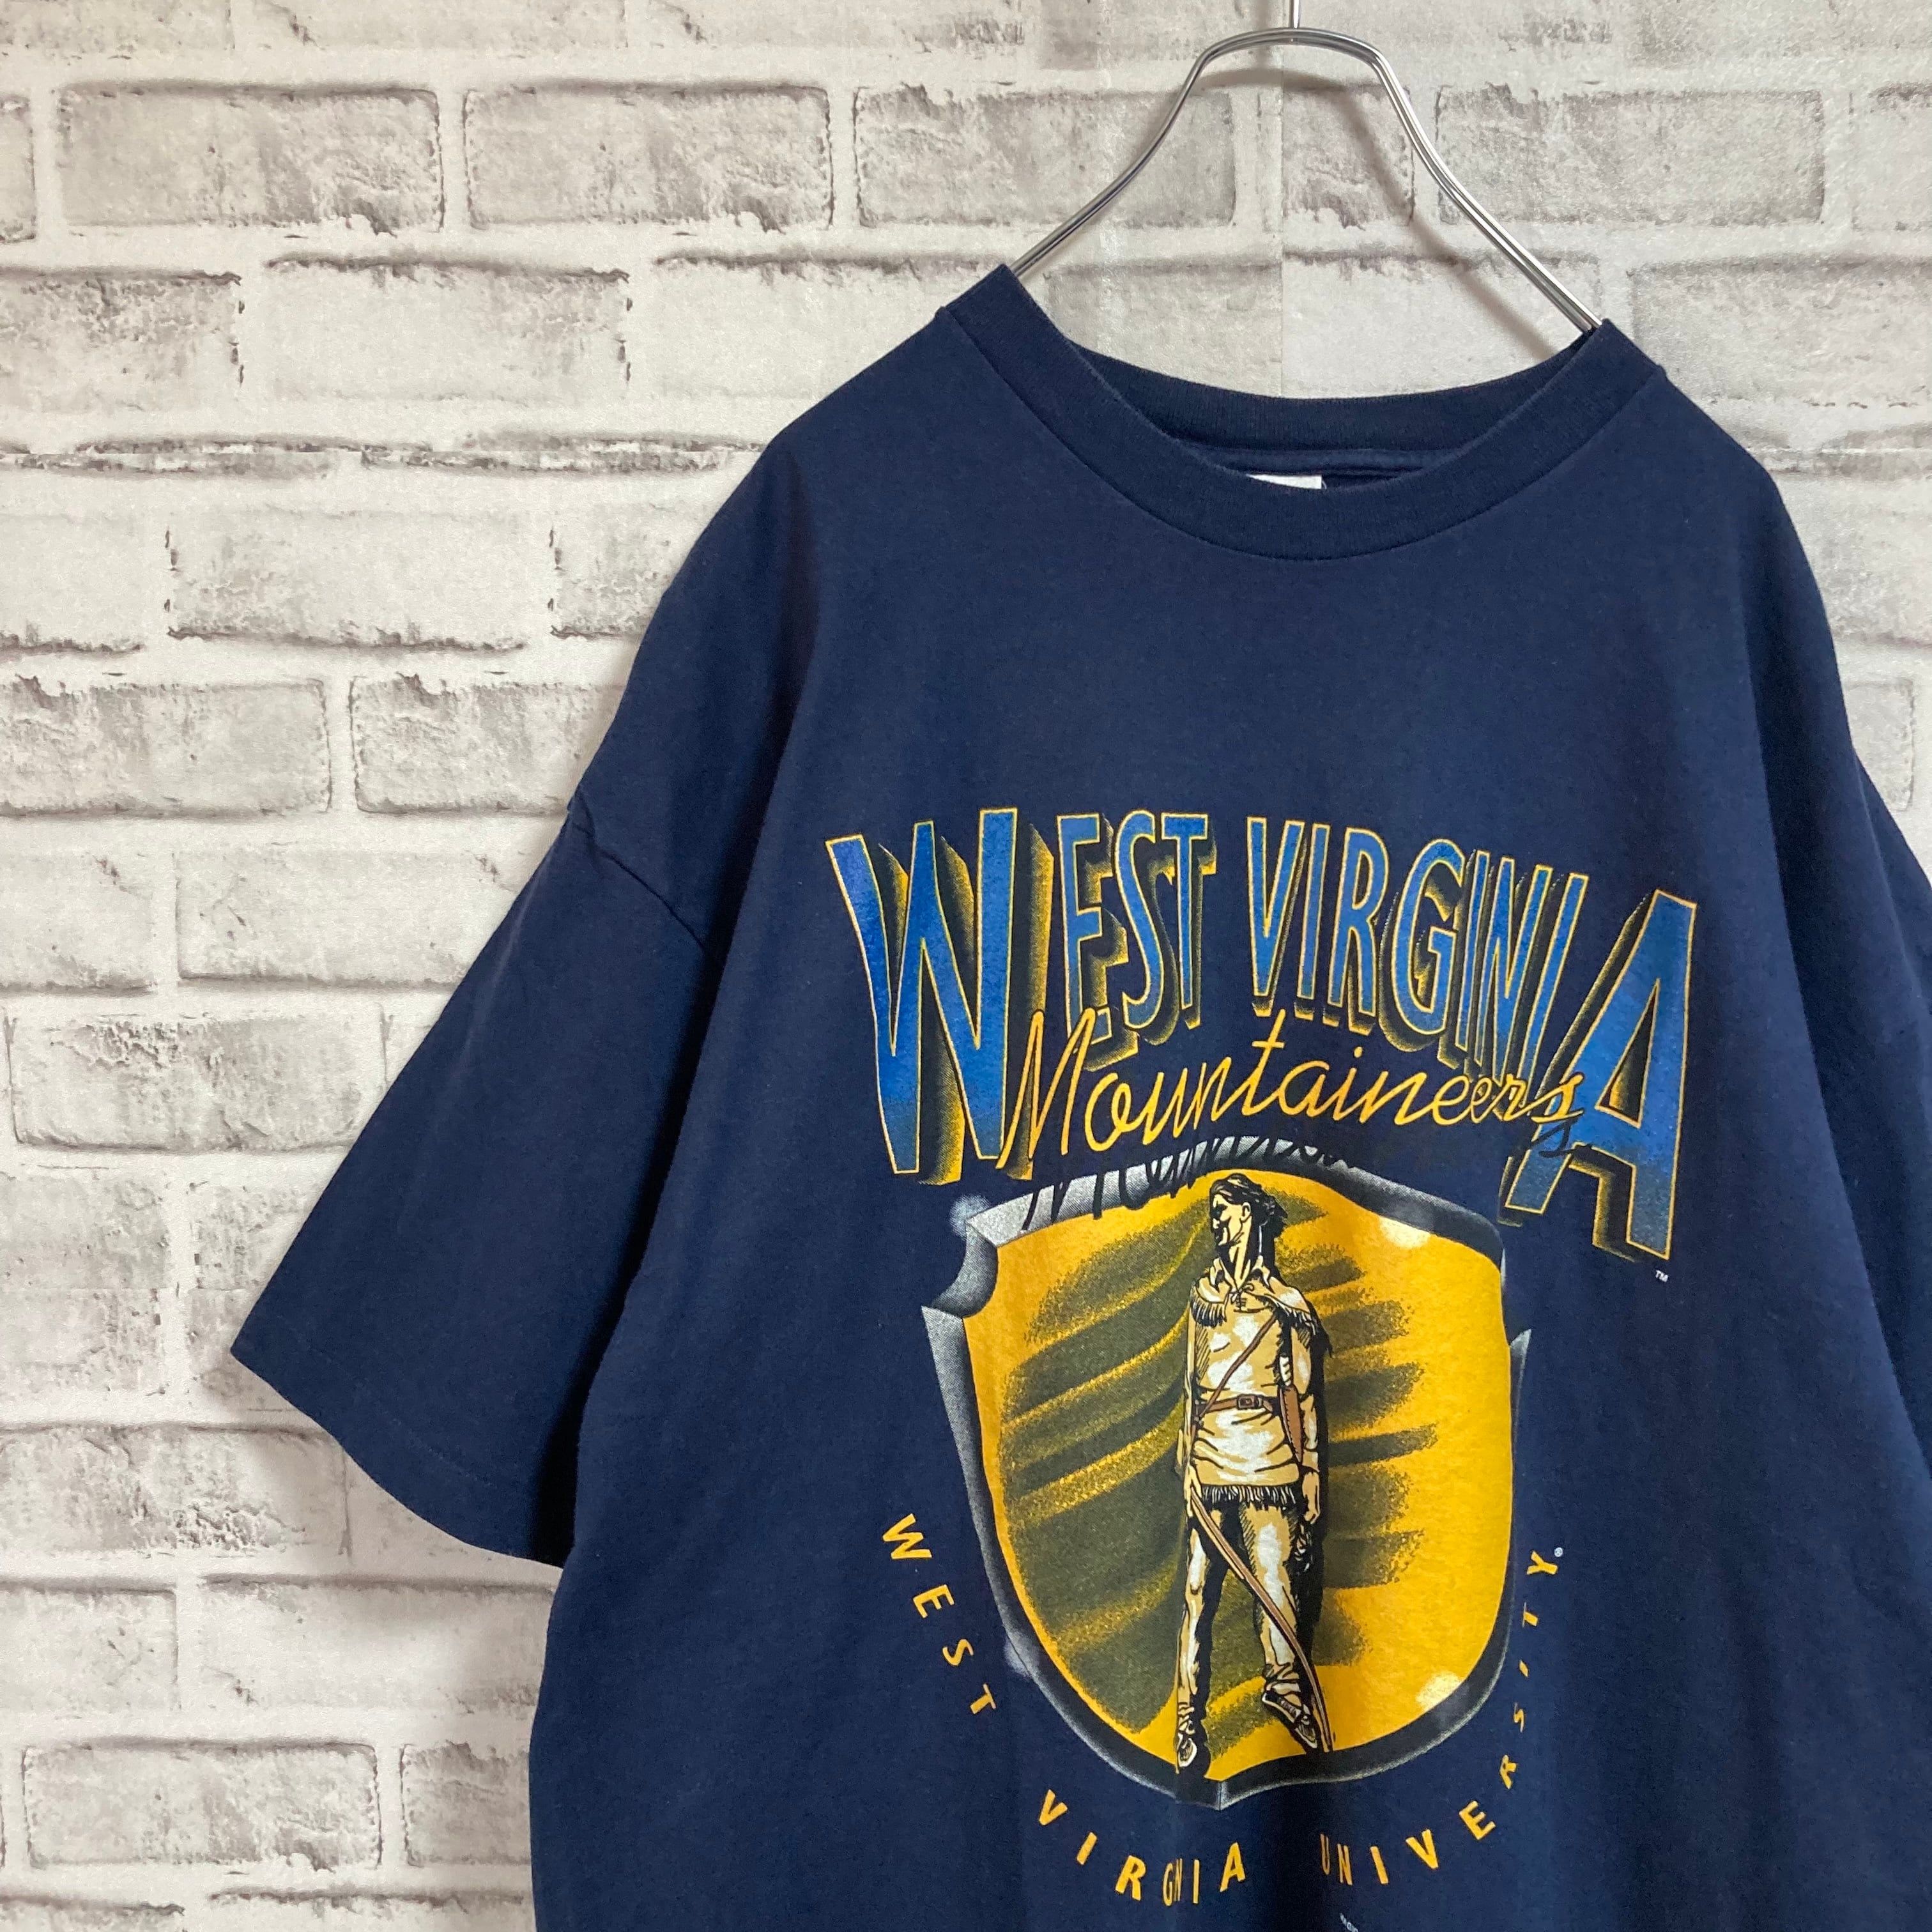 RiddellS/S Tee XL “WEST VIRGINIA UNIVERSITY” Made in USA Tシャツ